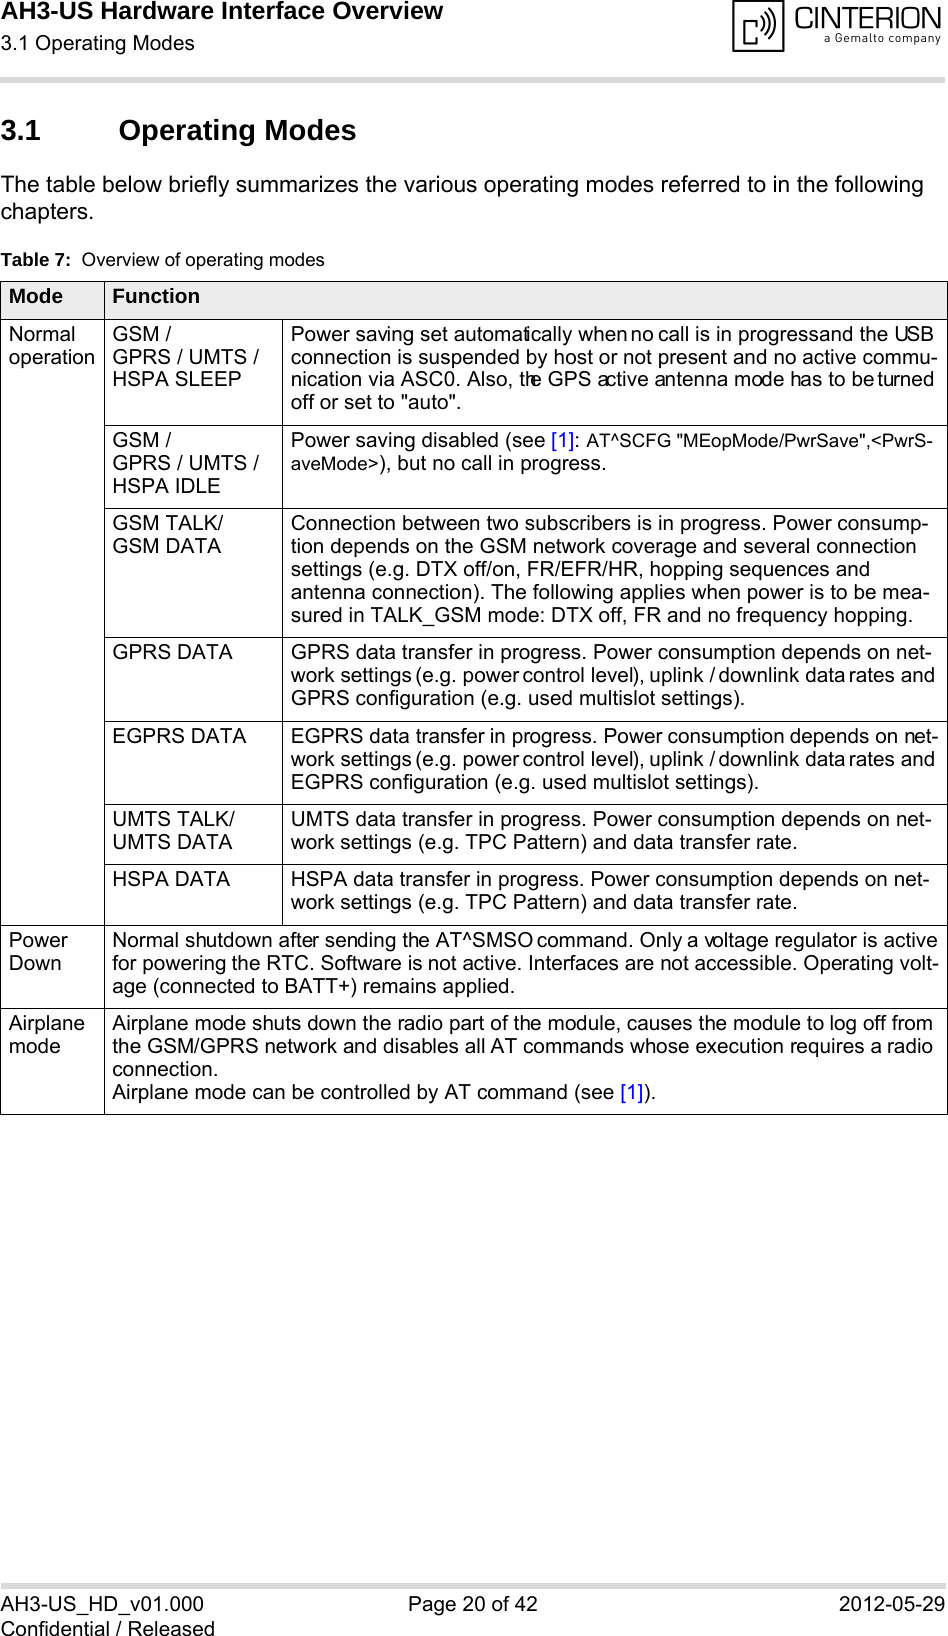 AH3-US Hardware Interface Overview3.1 Operating Modes28AH3-US_HD_v01.000 Page 20 of 42 2012-05-29Confidential / Released3.1 Operating ModesThe table below briefly summarizes the various operating modes referred to in the following chapters.Table 7:  Overview of operating modesMode FunctionNormal operationGSM / GPRS / UMTS / HSPA SLEEPPower saving set automatically when no call is in progress and the USB connection is suspended by host or not present and no active commu-nication via ASC0. Also, the GPS active antenna mode has to be turned off or set to &quot;auto&quot;.GSM / GPRS / UMTS / HSPA IDLEPower saving disabled (see [1]: AT^SCFG &quot;MEopMode/PwrSave&quot;,&lt;PwrS-aveMode&gt;), but no call in progress.GSM TALK/GSM DATAConnection between two subscribers is in progress. Power consump-tion depends on the GSM network coverage and several connection settings (e.g. DTX off/on, FR/EFR/HR, hopping sequences and antenna connection). The following applies when power is to be mea-sured in TALK_GSM mode: DTX off, FR and no frequency hopping.GPRS DATA GPRS data transfer in progress. Power consumption depends on net-work settings (e.g. power control level), uplink / downlink data rates and GPRS configuration (e.g. used multislot settings).EGPRS DATA EGPRS data transfer in progress. Power consumption depends on net-work settings (e.g. power control level), uplink / downlink data rates and EGPRS configuration (e.g. used multislot settings).UMTS TALK/UMTS DATAUMTS data transfer in progress. Power consumption depends on net-work settings (e.g. TPC Pattern) and data transfer rate.HSPA DATA HSPA data transfer in progress. Power consumption depends on net-work settings (e.g. TPC Pattern) and data transfer rate.Power DownNormal shutdown after sending the AT^SMSO command. Only a voltage regulator is active for powering the RTC. Software is not active. Interfaces are not accessible. Operating volt-age (connected to BATT+) remains applied.Airplane modeAirplane mode shuts down the radio part of the module, causes the module to log off from the GSM/GPRS network and disables all AT commands whose execution requires a radio connection.Airplane mode can be controlled by AT command (see [1]).